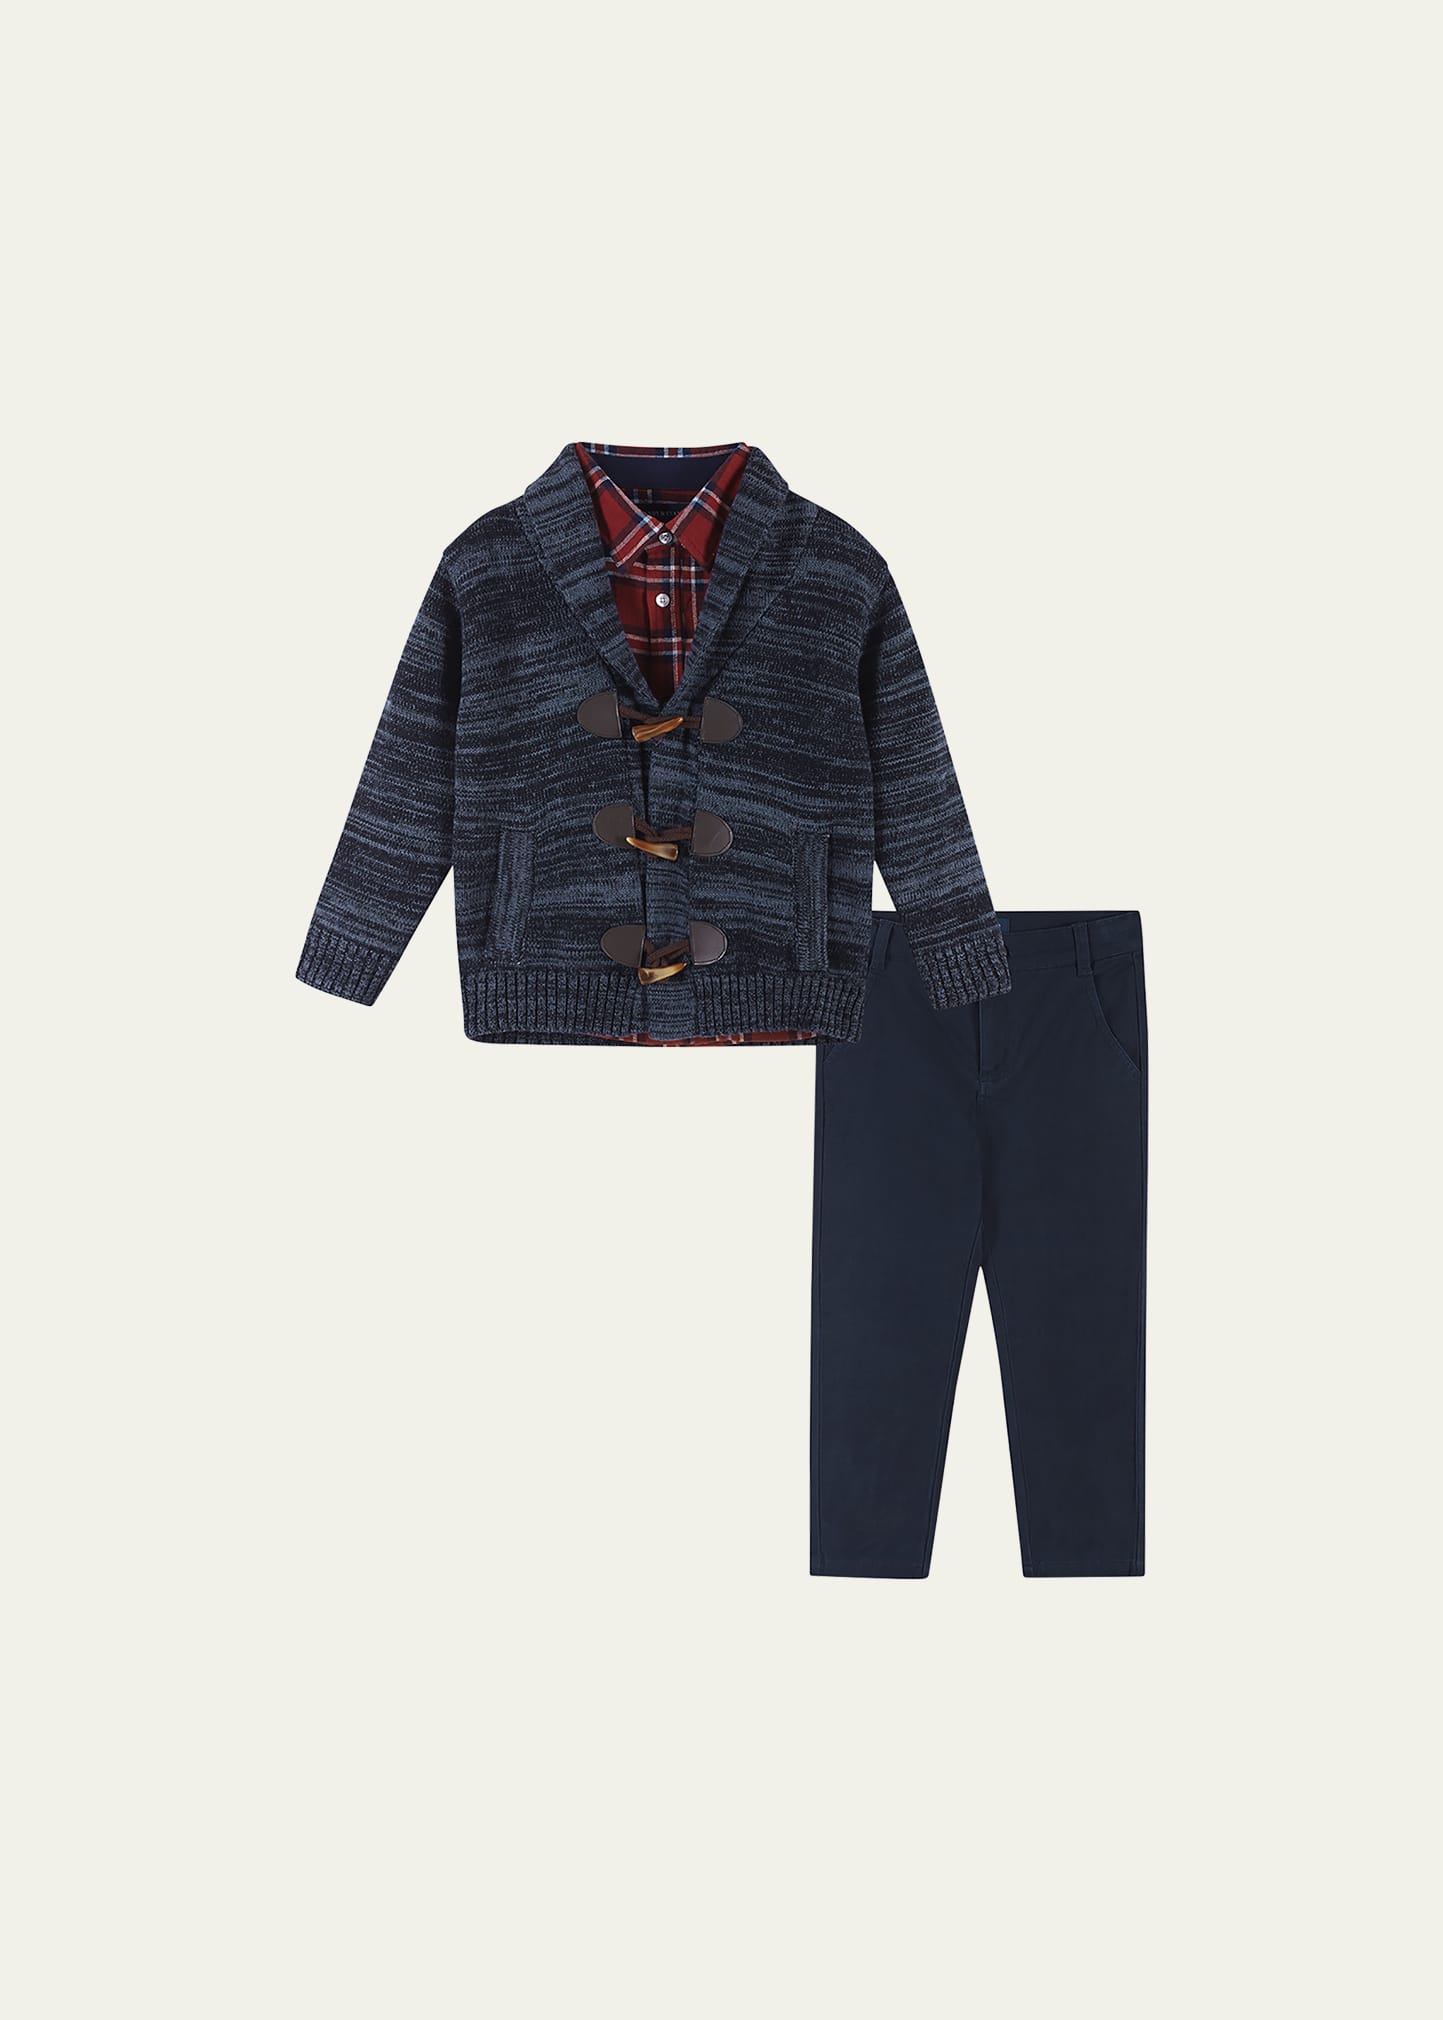 ANDY & EVAN BOY'S TOGGLE CARDIGAN W/ BUTTON DOWN SHIRT AND PANTS SET